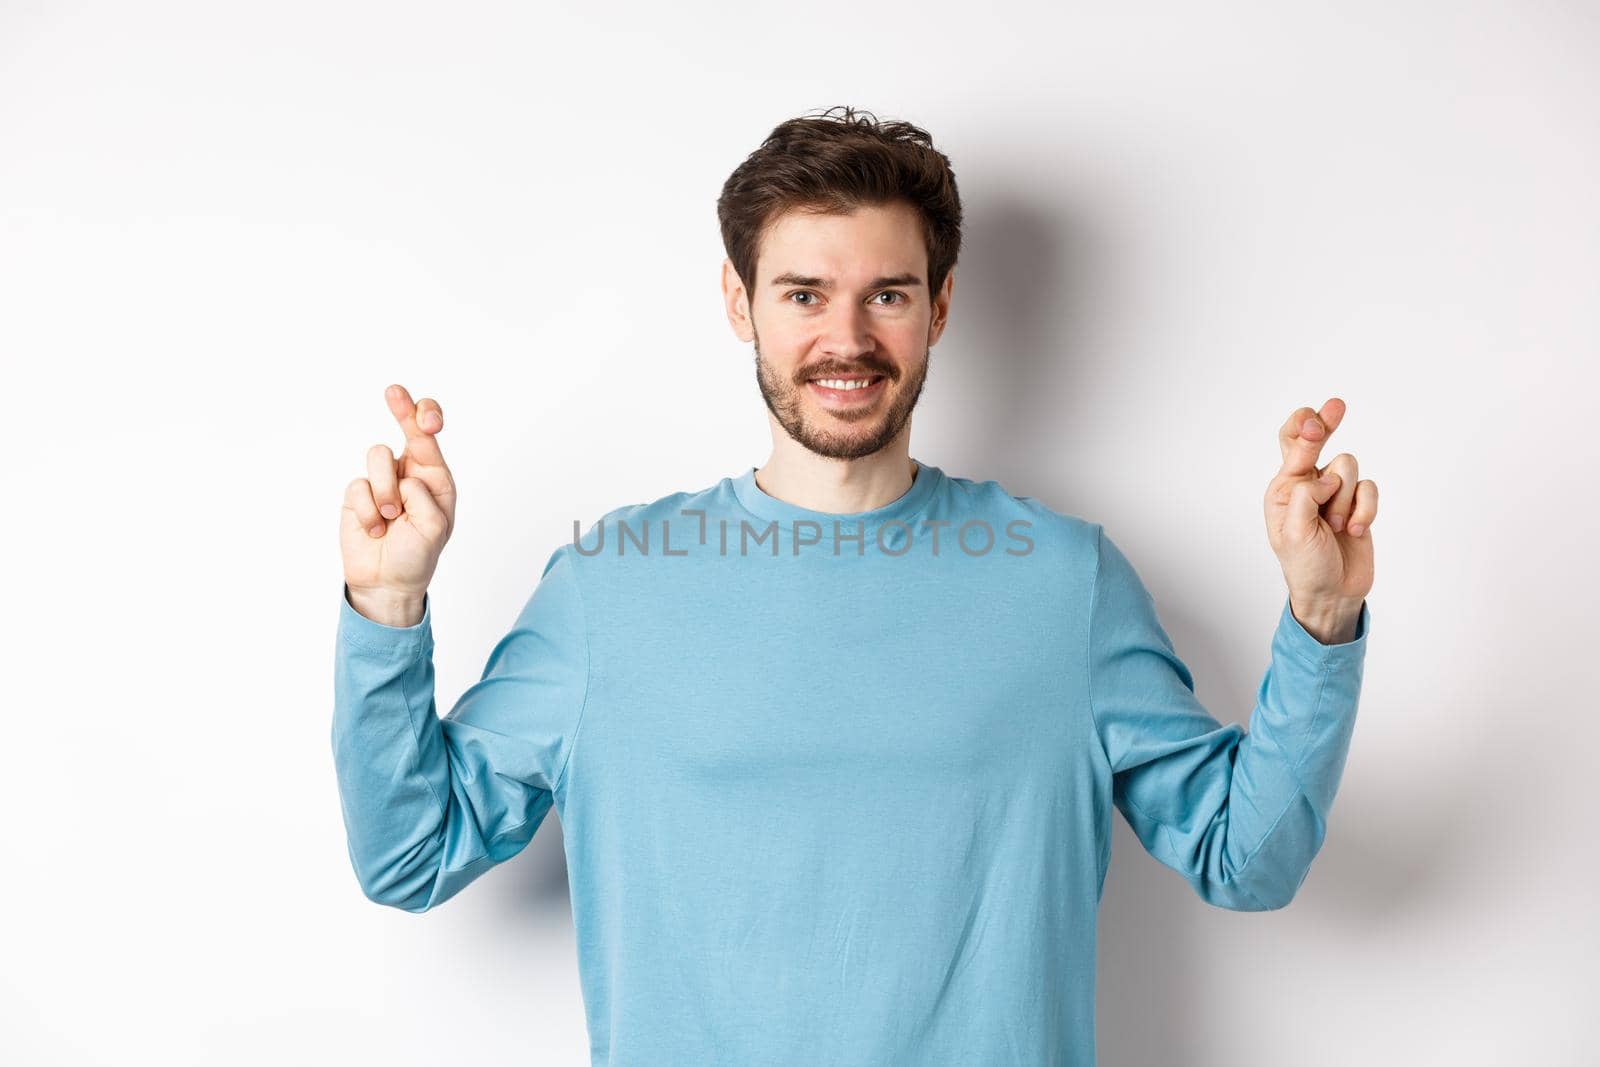 Optimistic smiling man cross fingers for good luck, making wish and waiting for results, standing over white background.